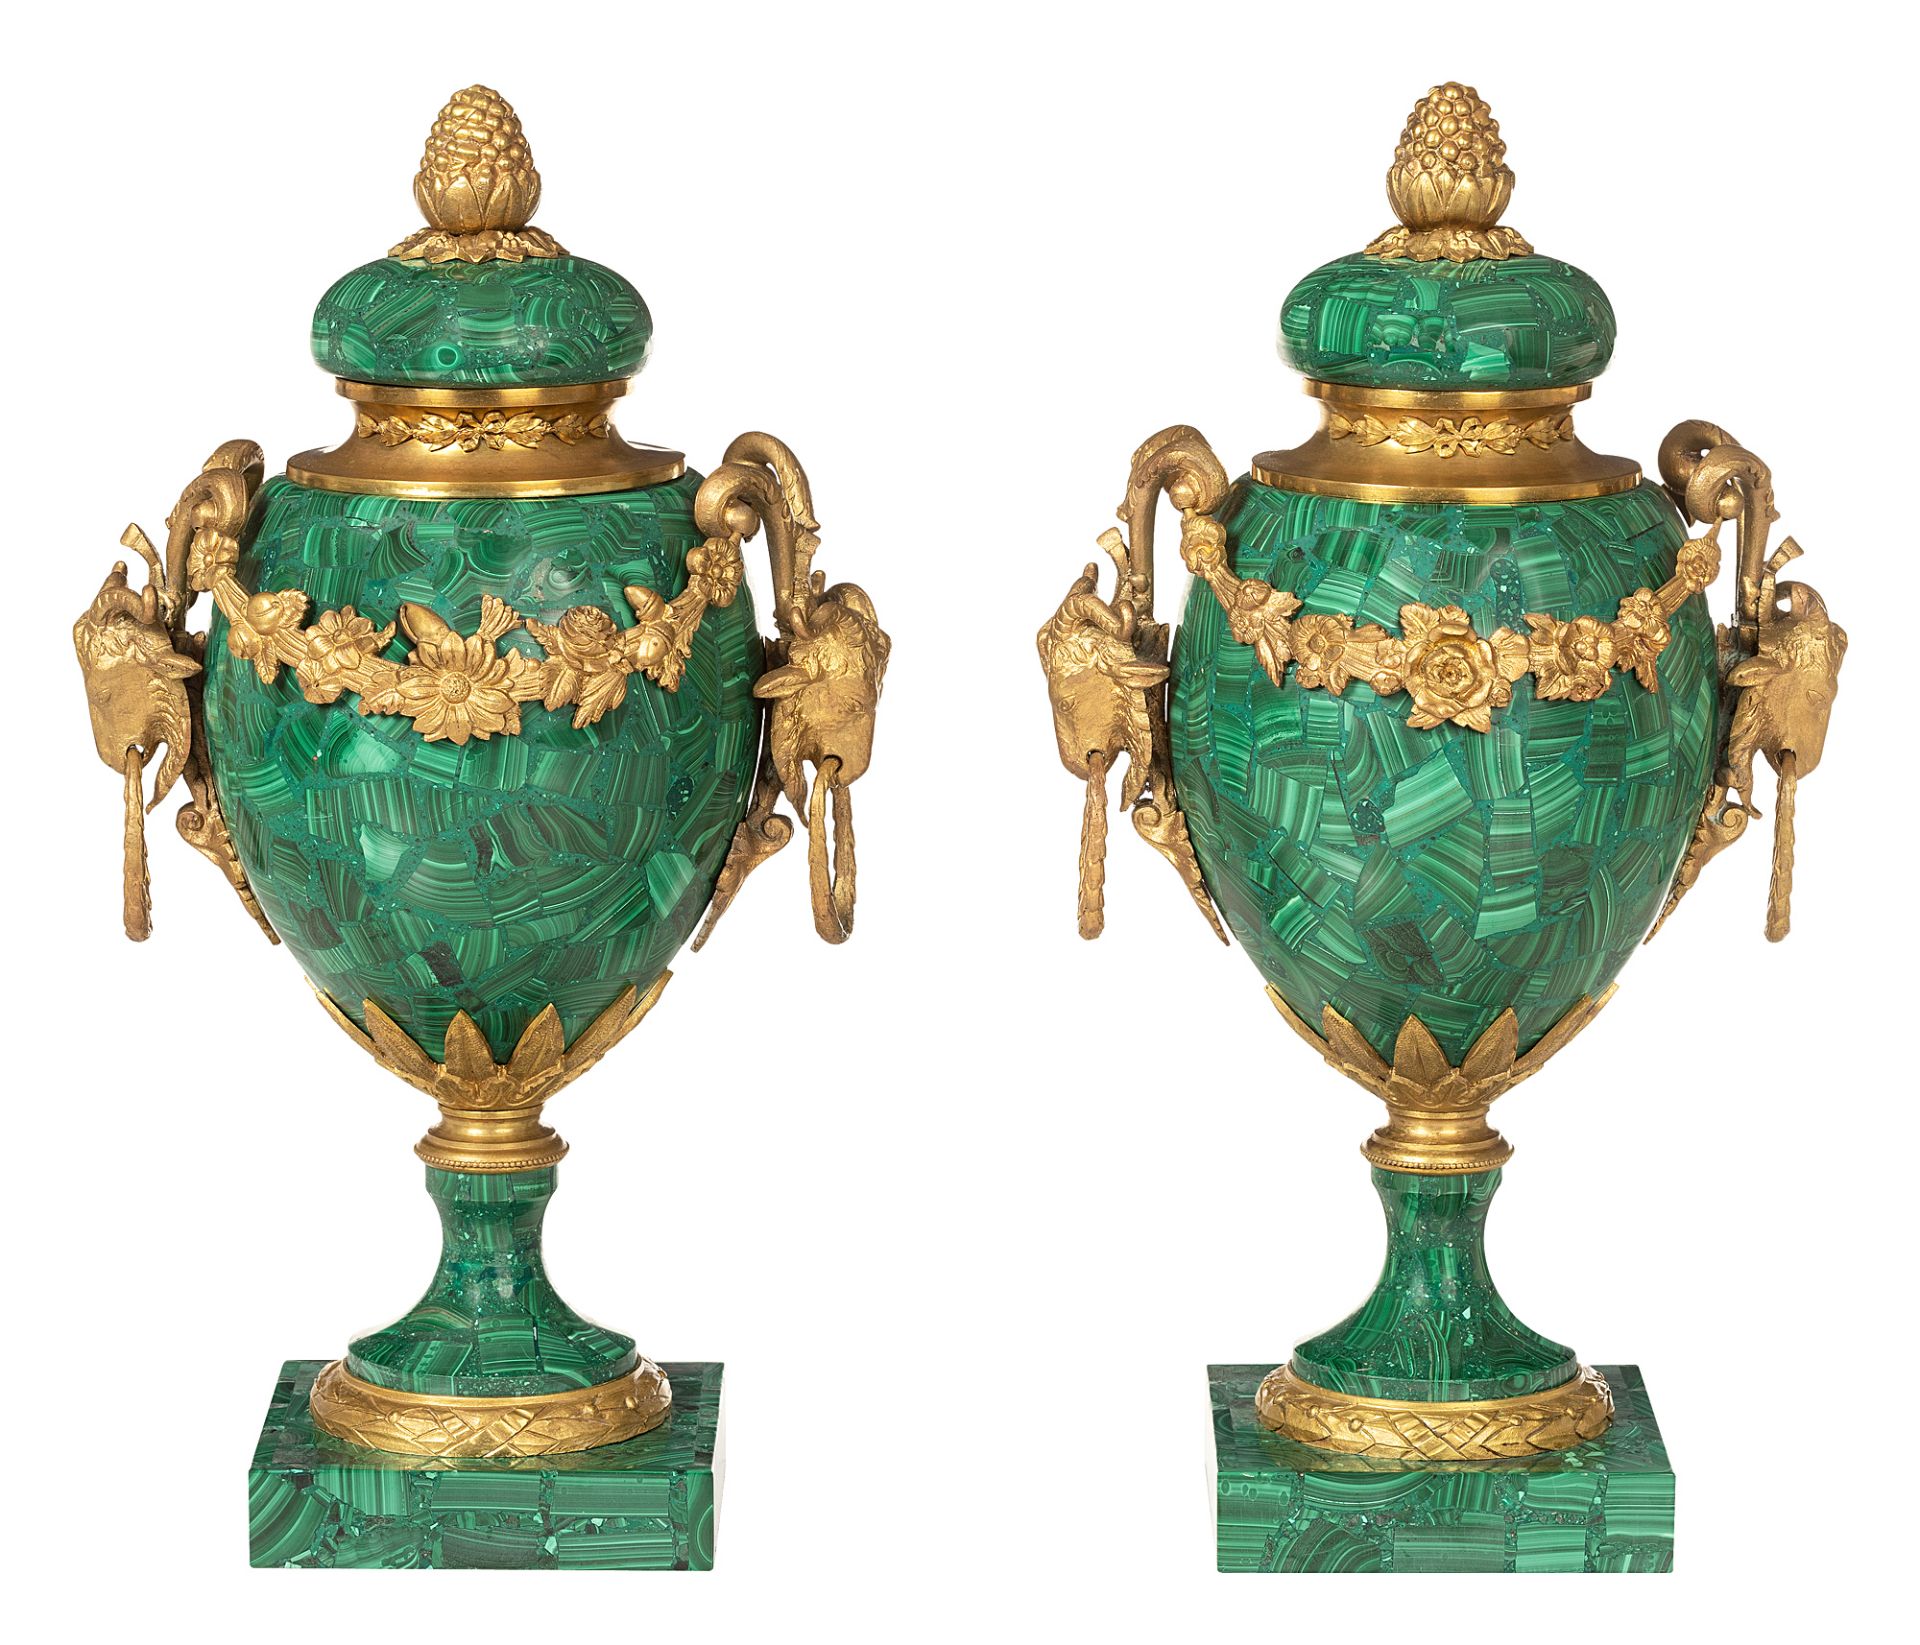 Pair of malachite vases in the style of French Early Classicism - Image 2 of 8